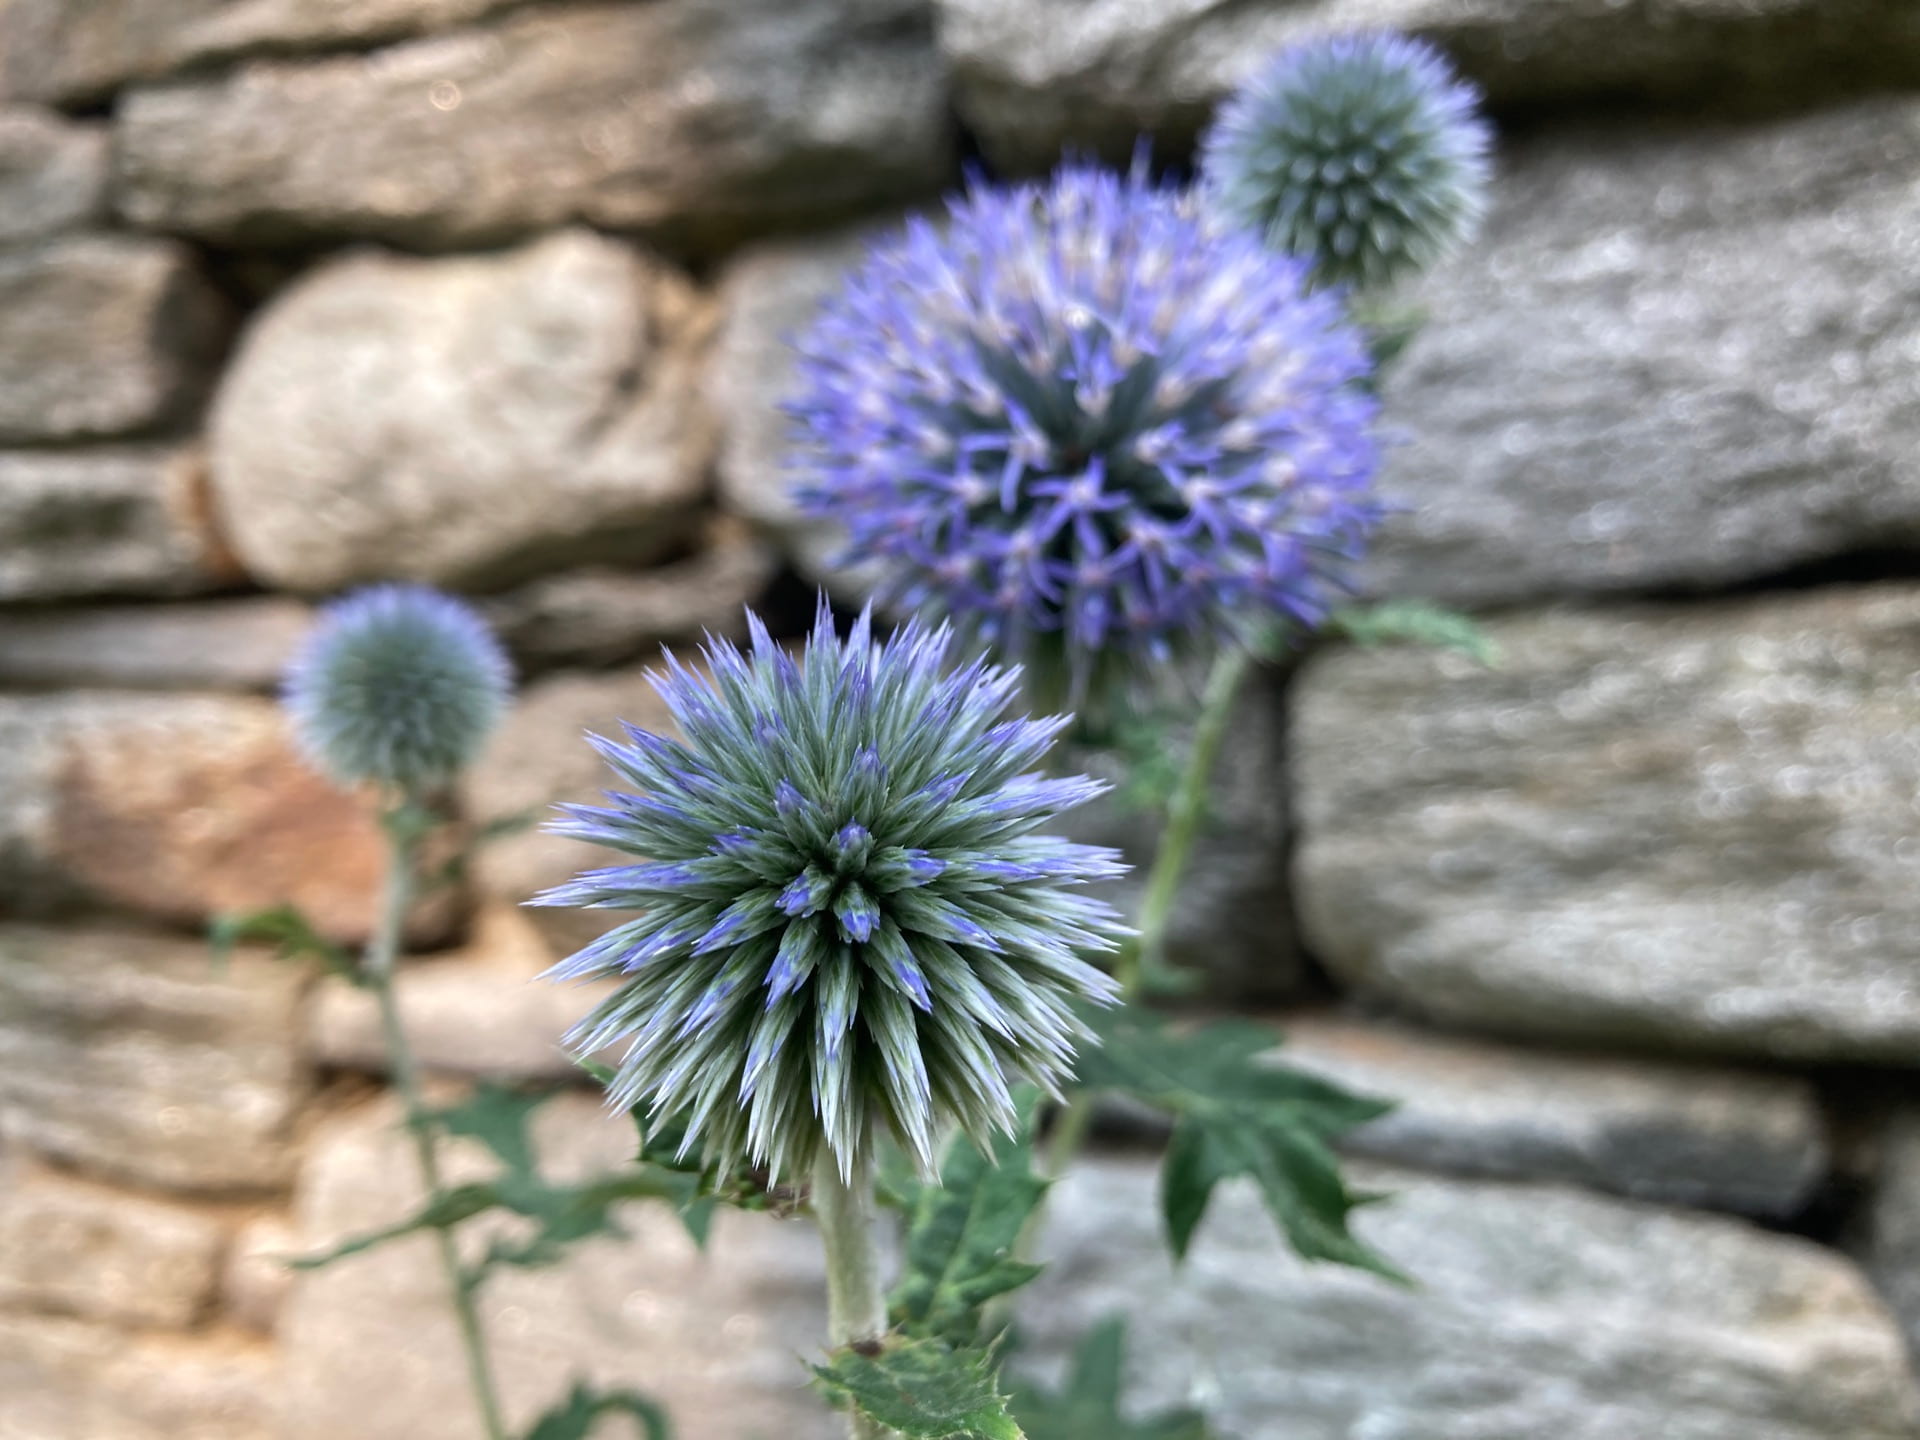 The geometric flowers of the globe thistle, Echinops bannaticus, add an architectural element to the Goddard Garden.